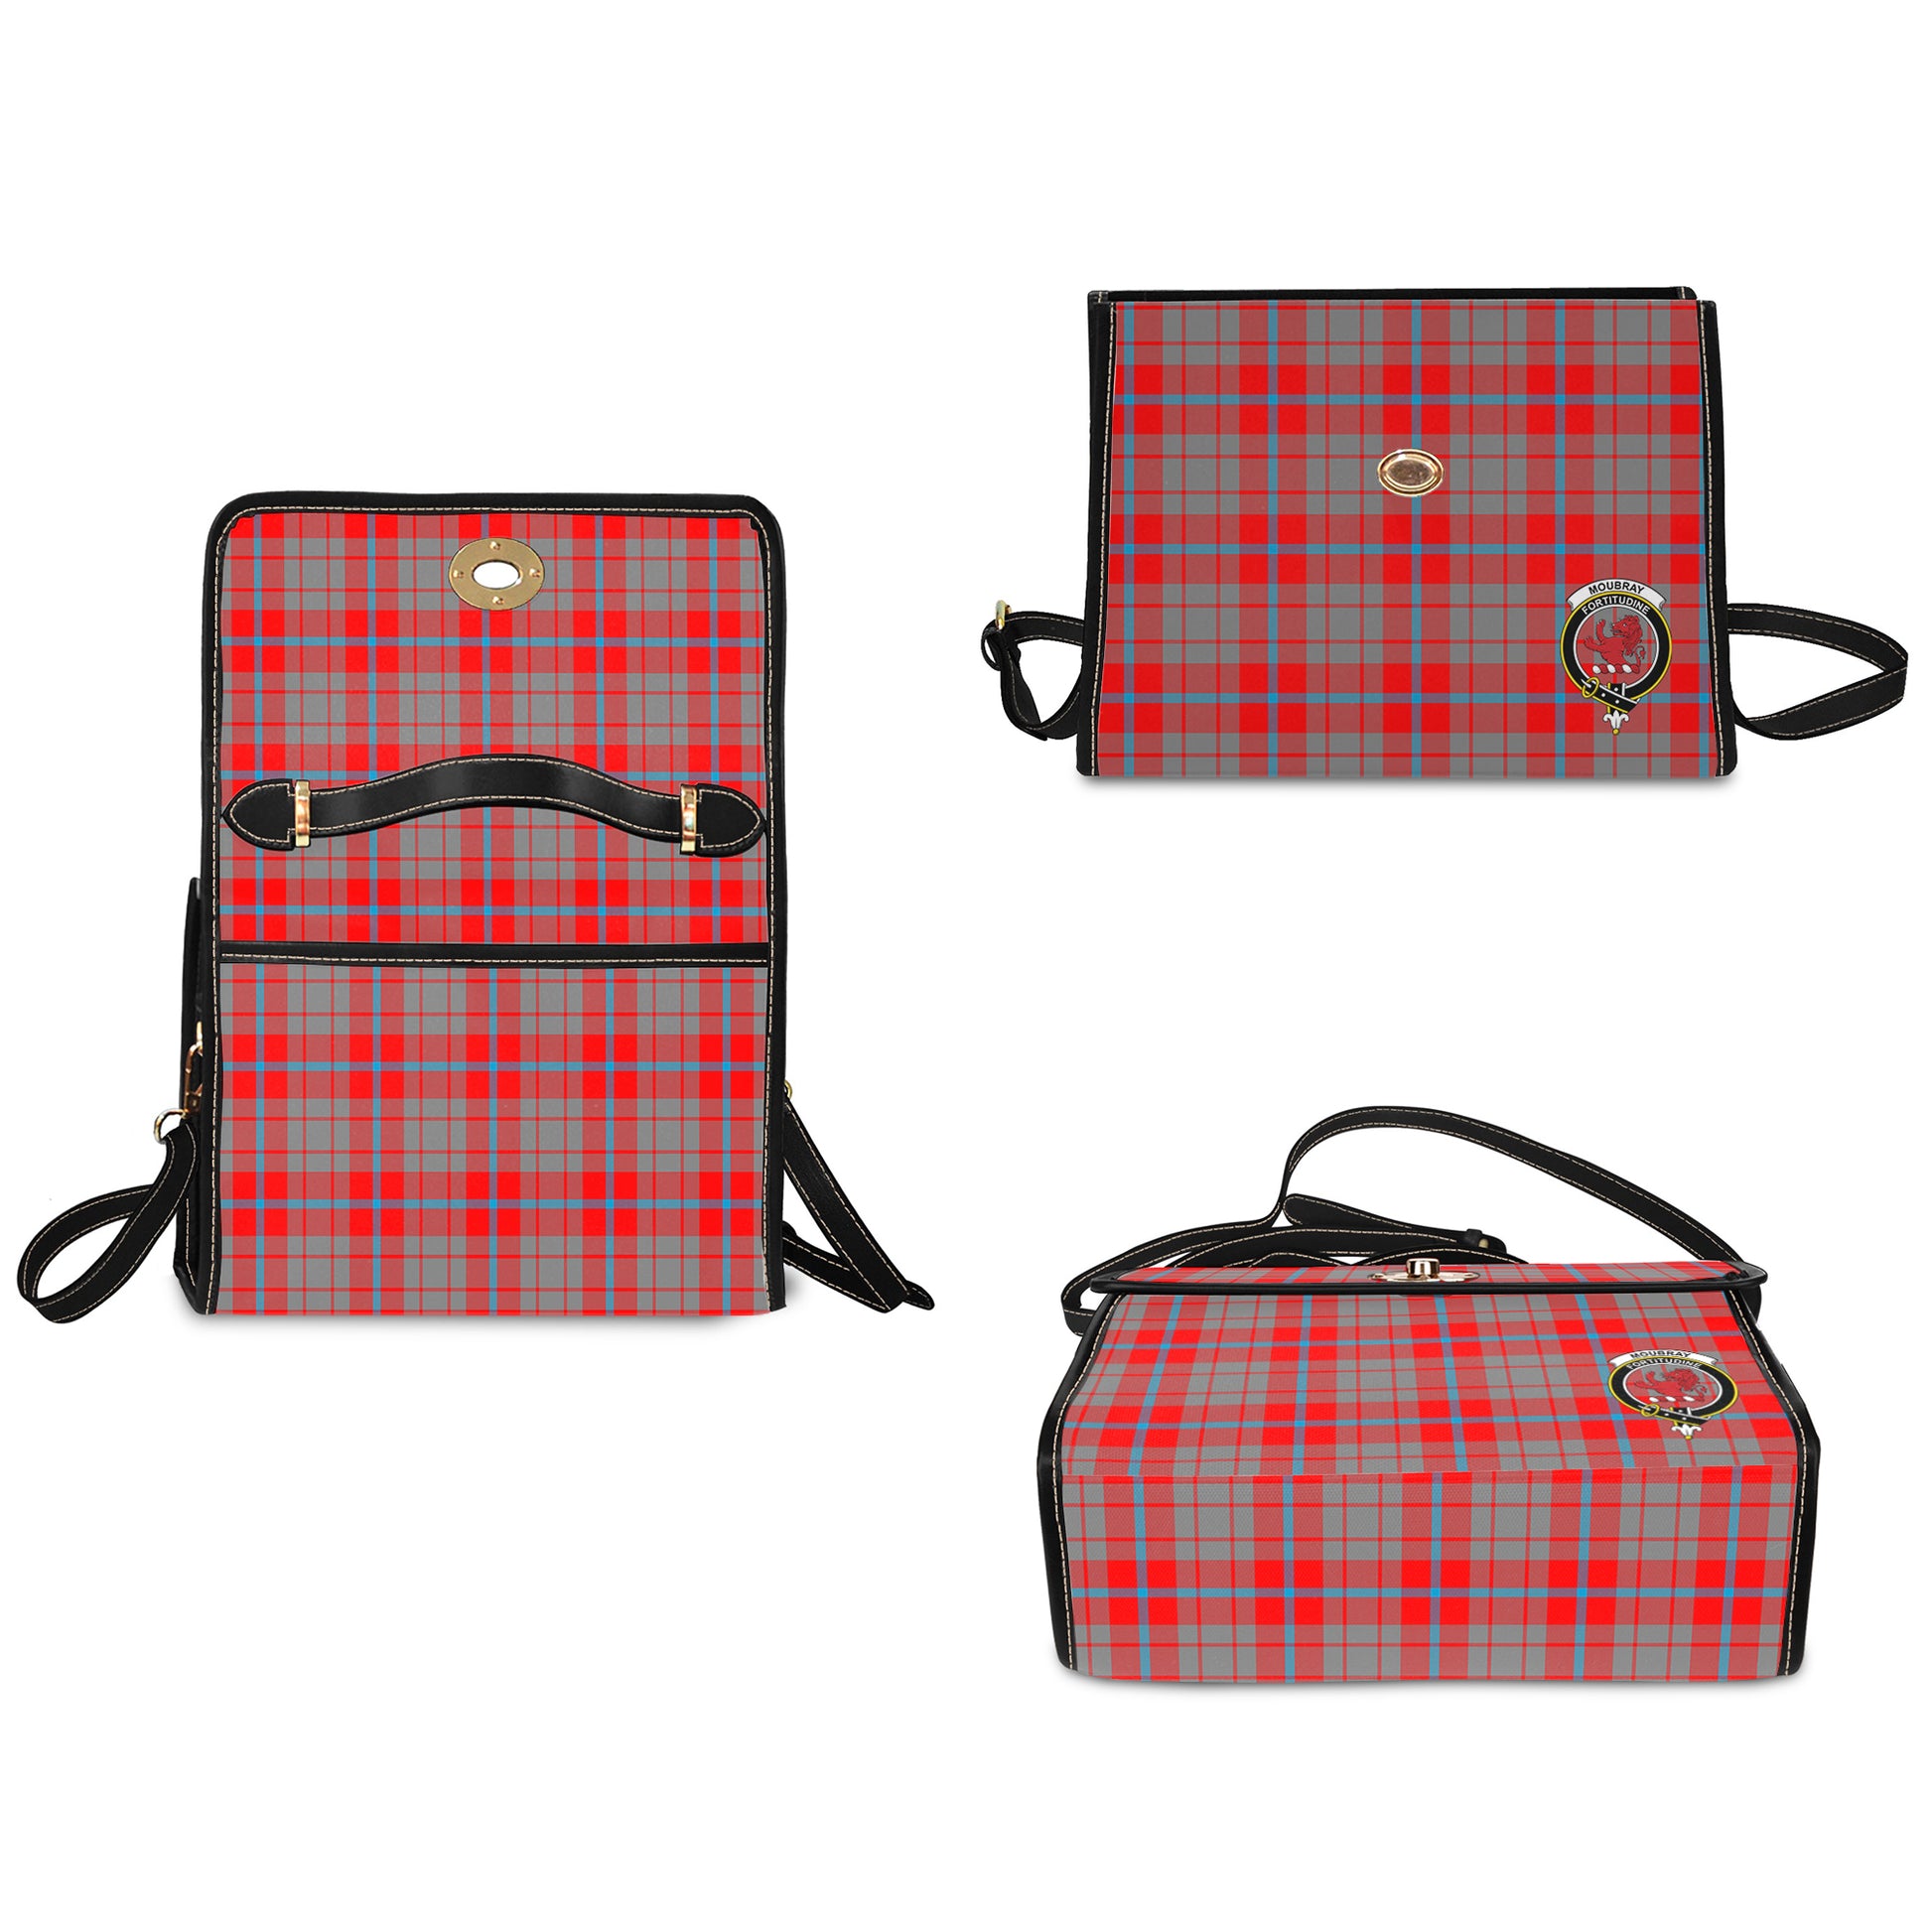 moubray-tartan-leather-strap-waterproof-canvas-bag-with-family-crest